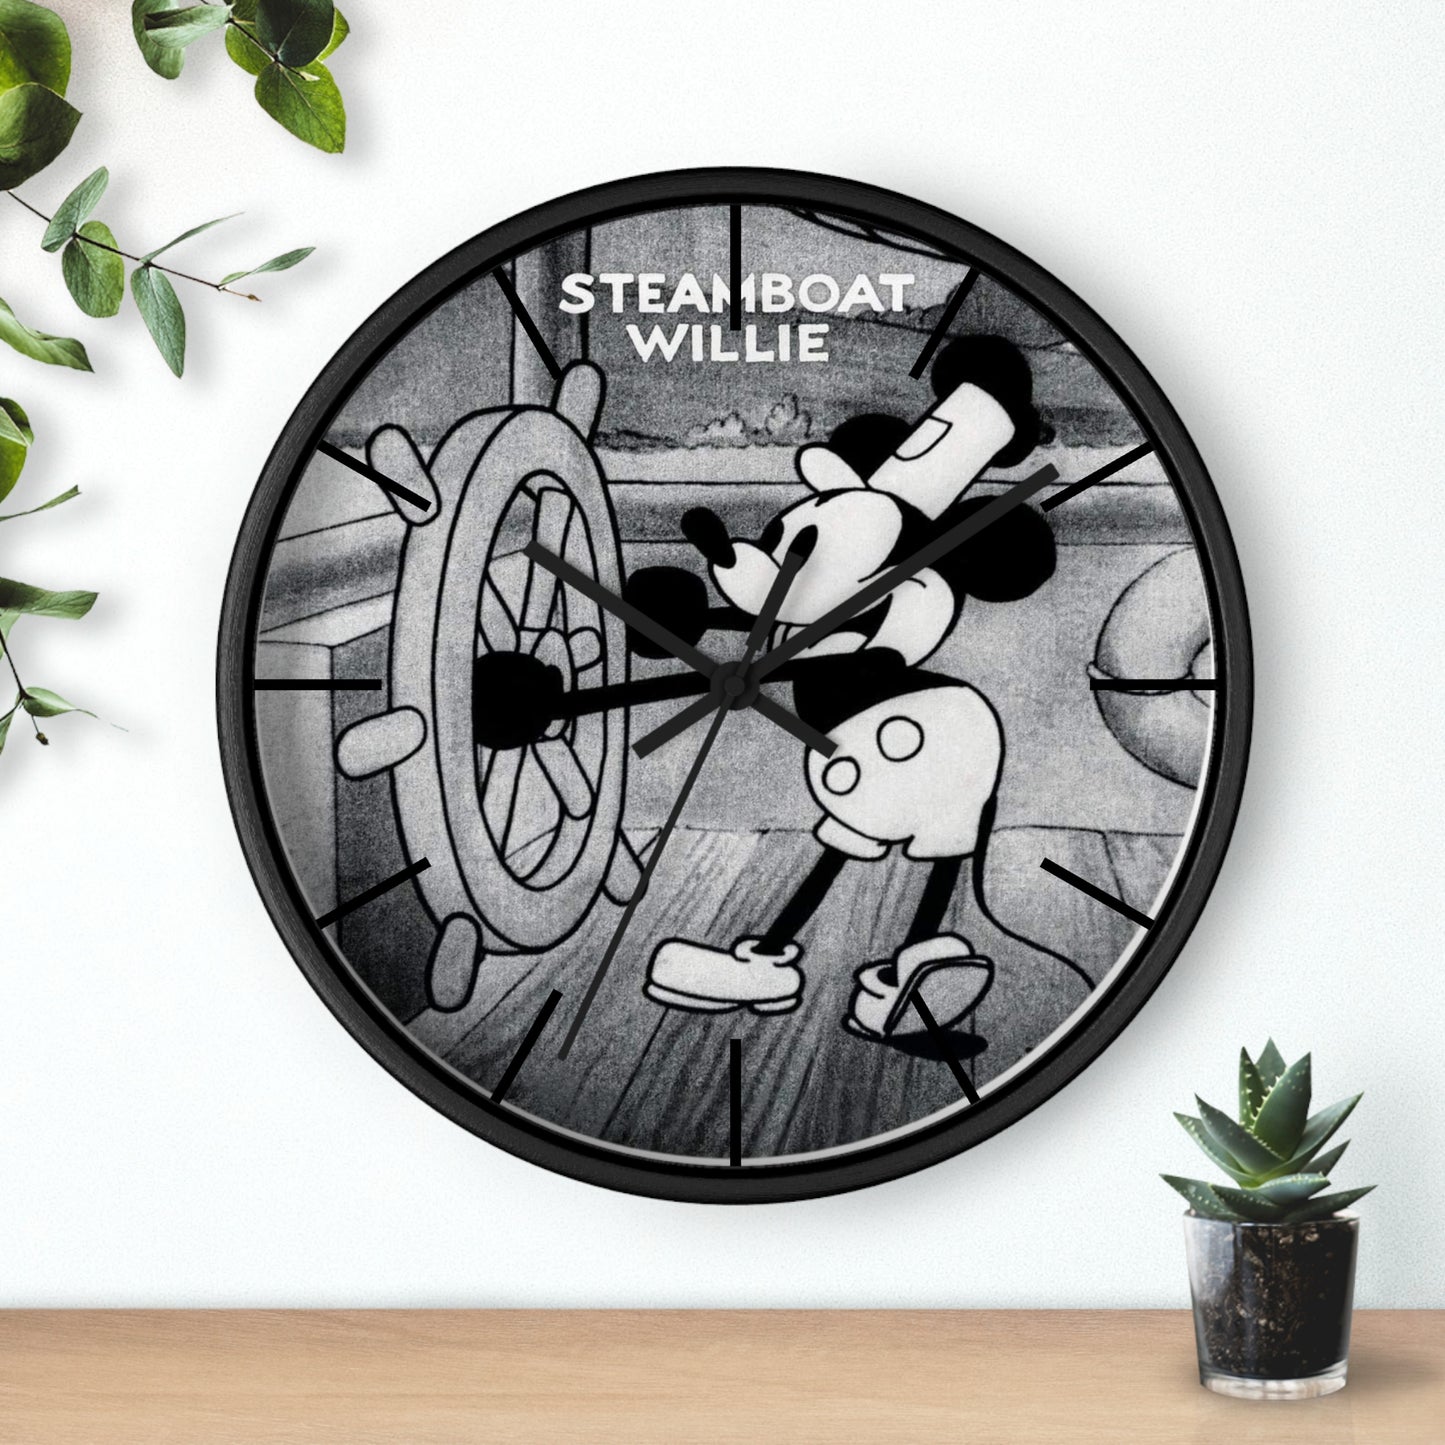 "Steamboat Willie" Wall Clock, Silent Mechanism, Requires 1 Battery AA (not included)